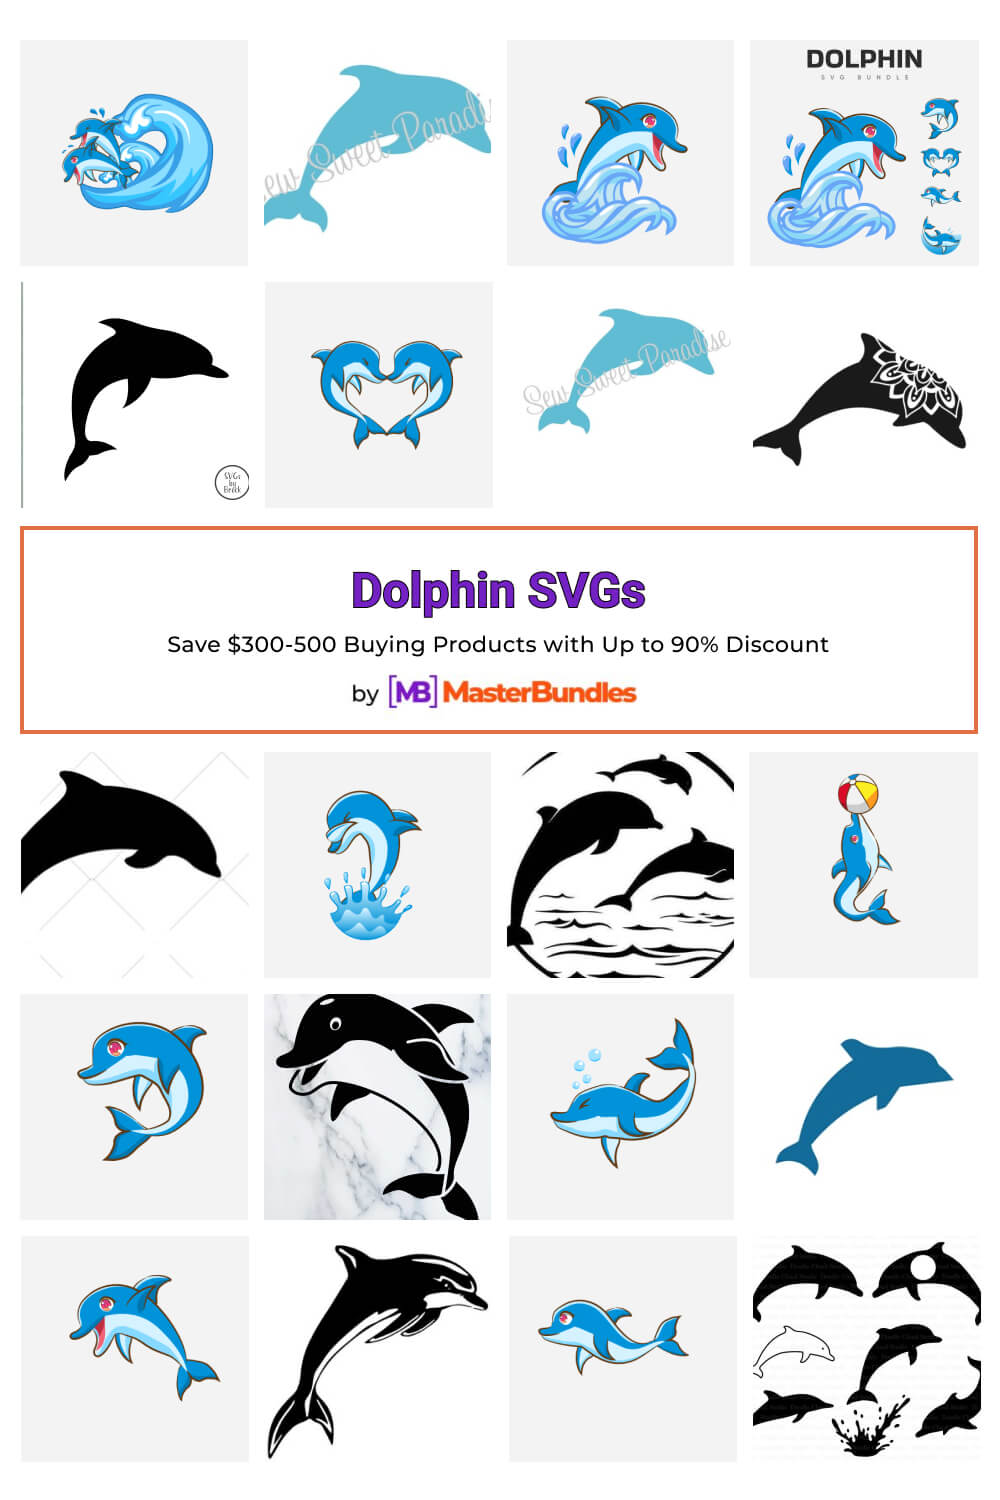 dolphin svgs pinterest image.